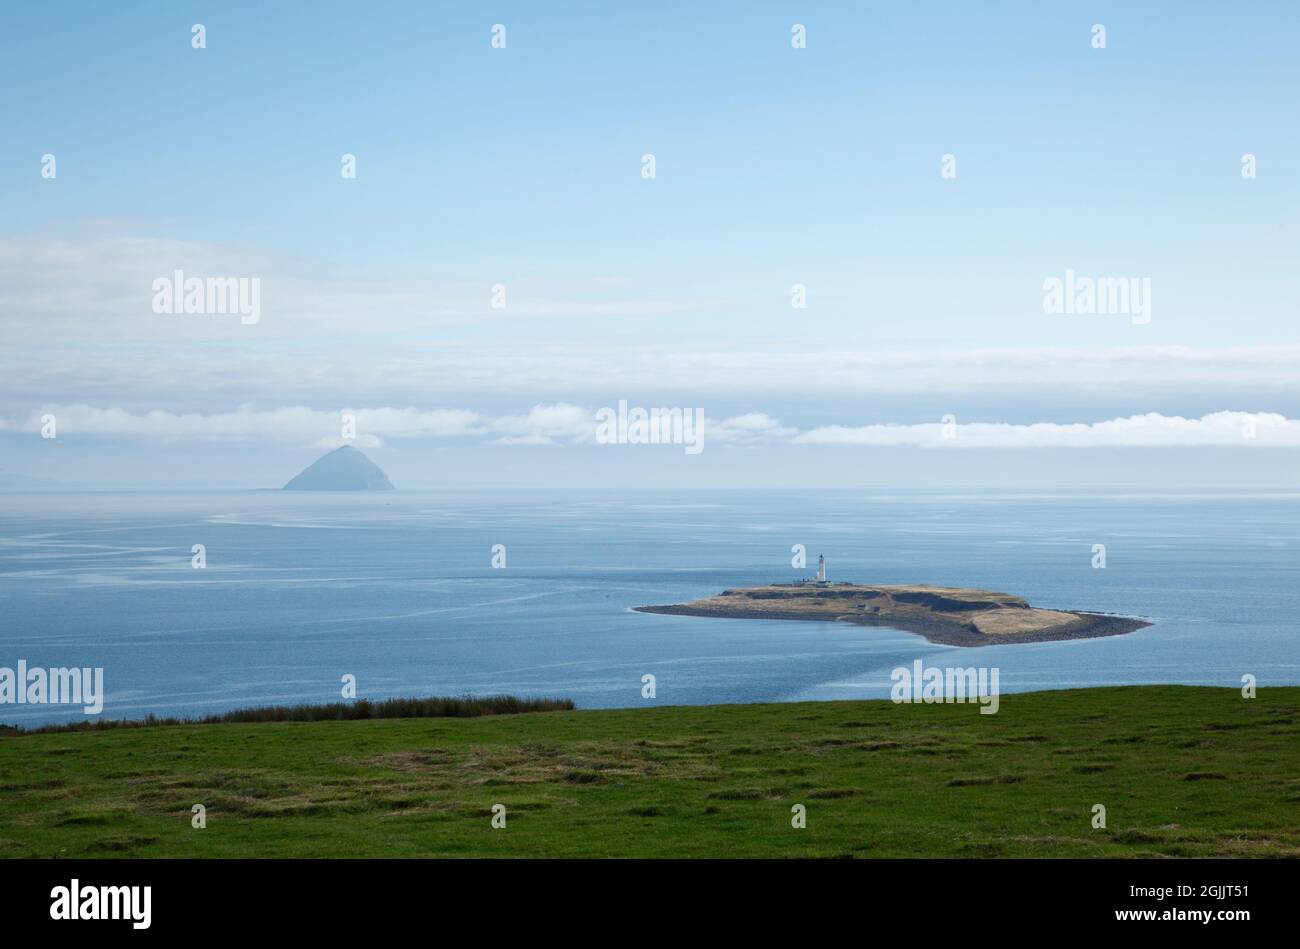 The Island of Pladda with Ailsa Craig in the Distance. Isle of Arran, Scotland, UK. Stock Photo